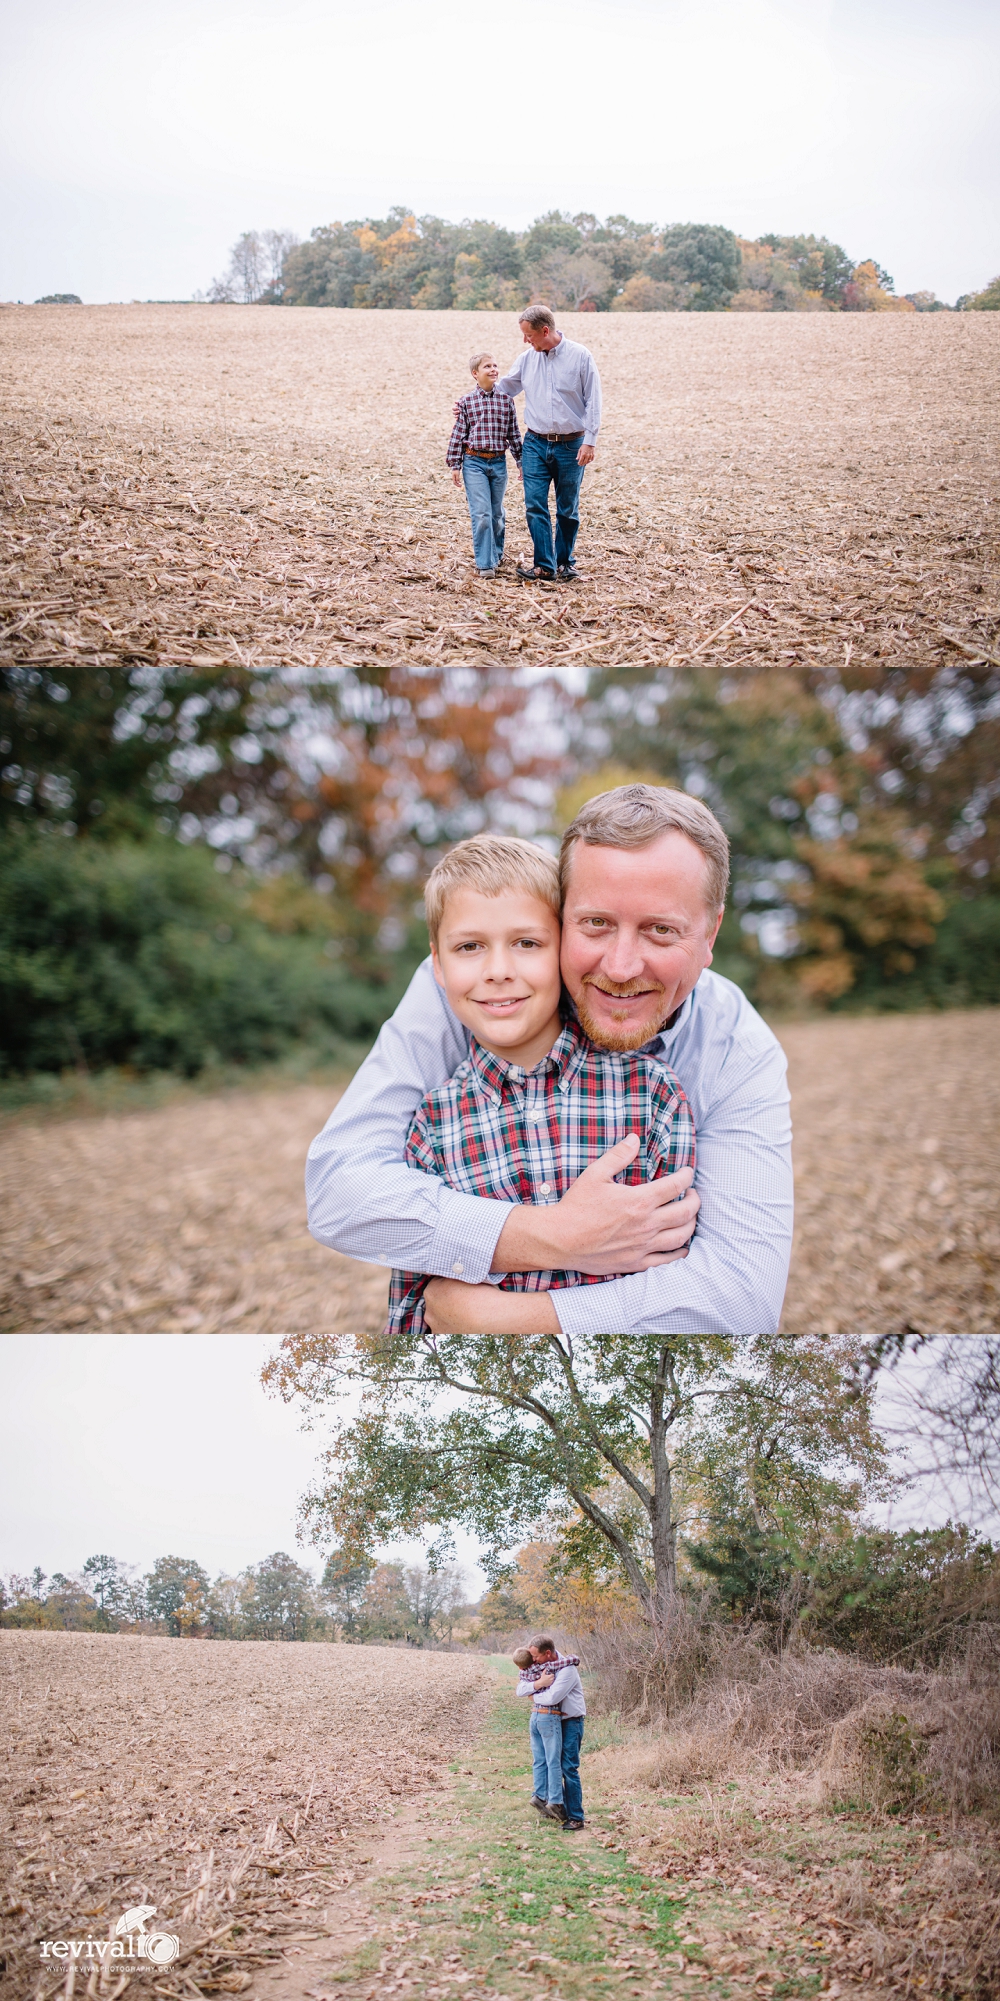 The Bland Family - A Revival Photography Family Session NC Lifestyle Photographers Revival Photography www.revivalphotography.com